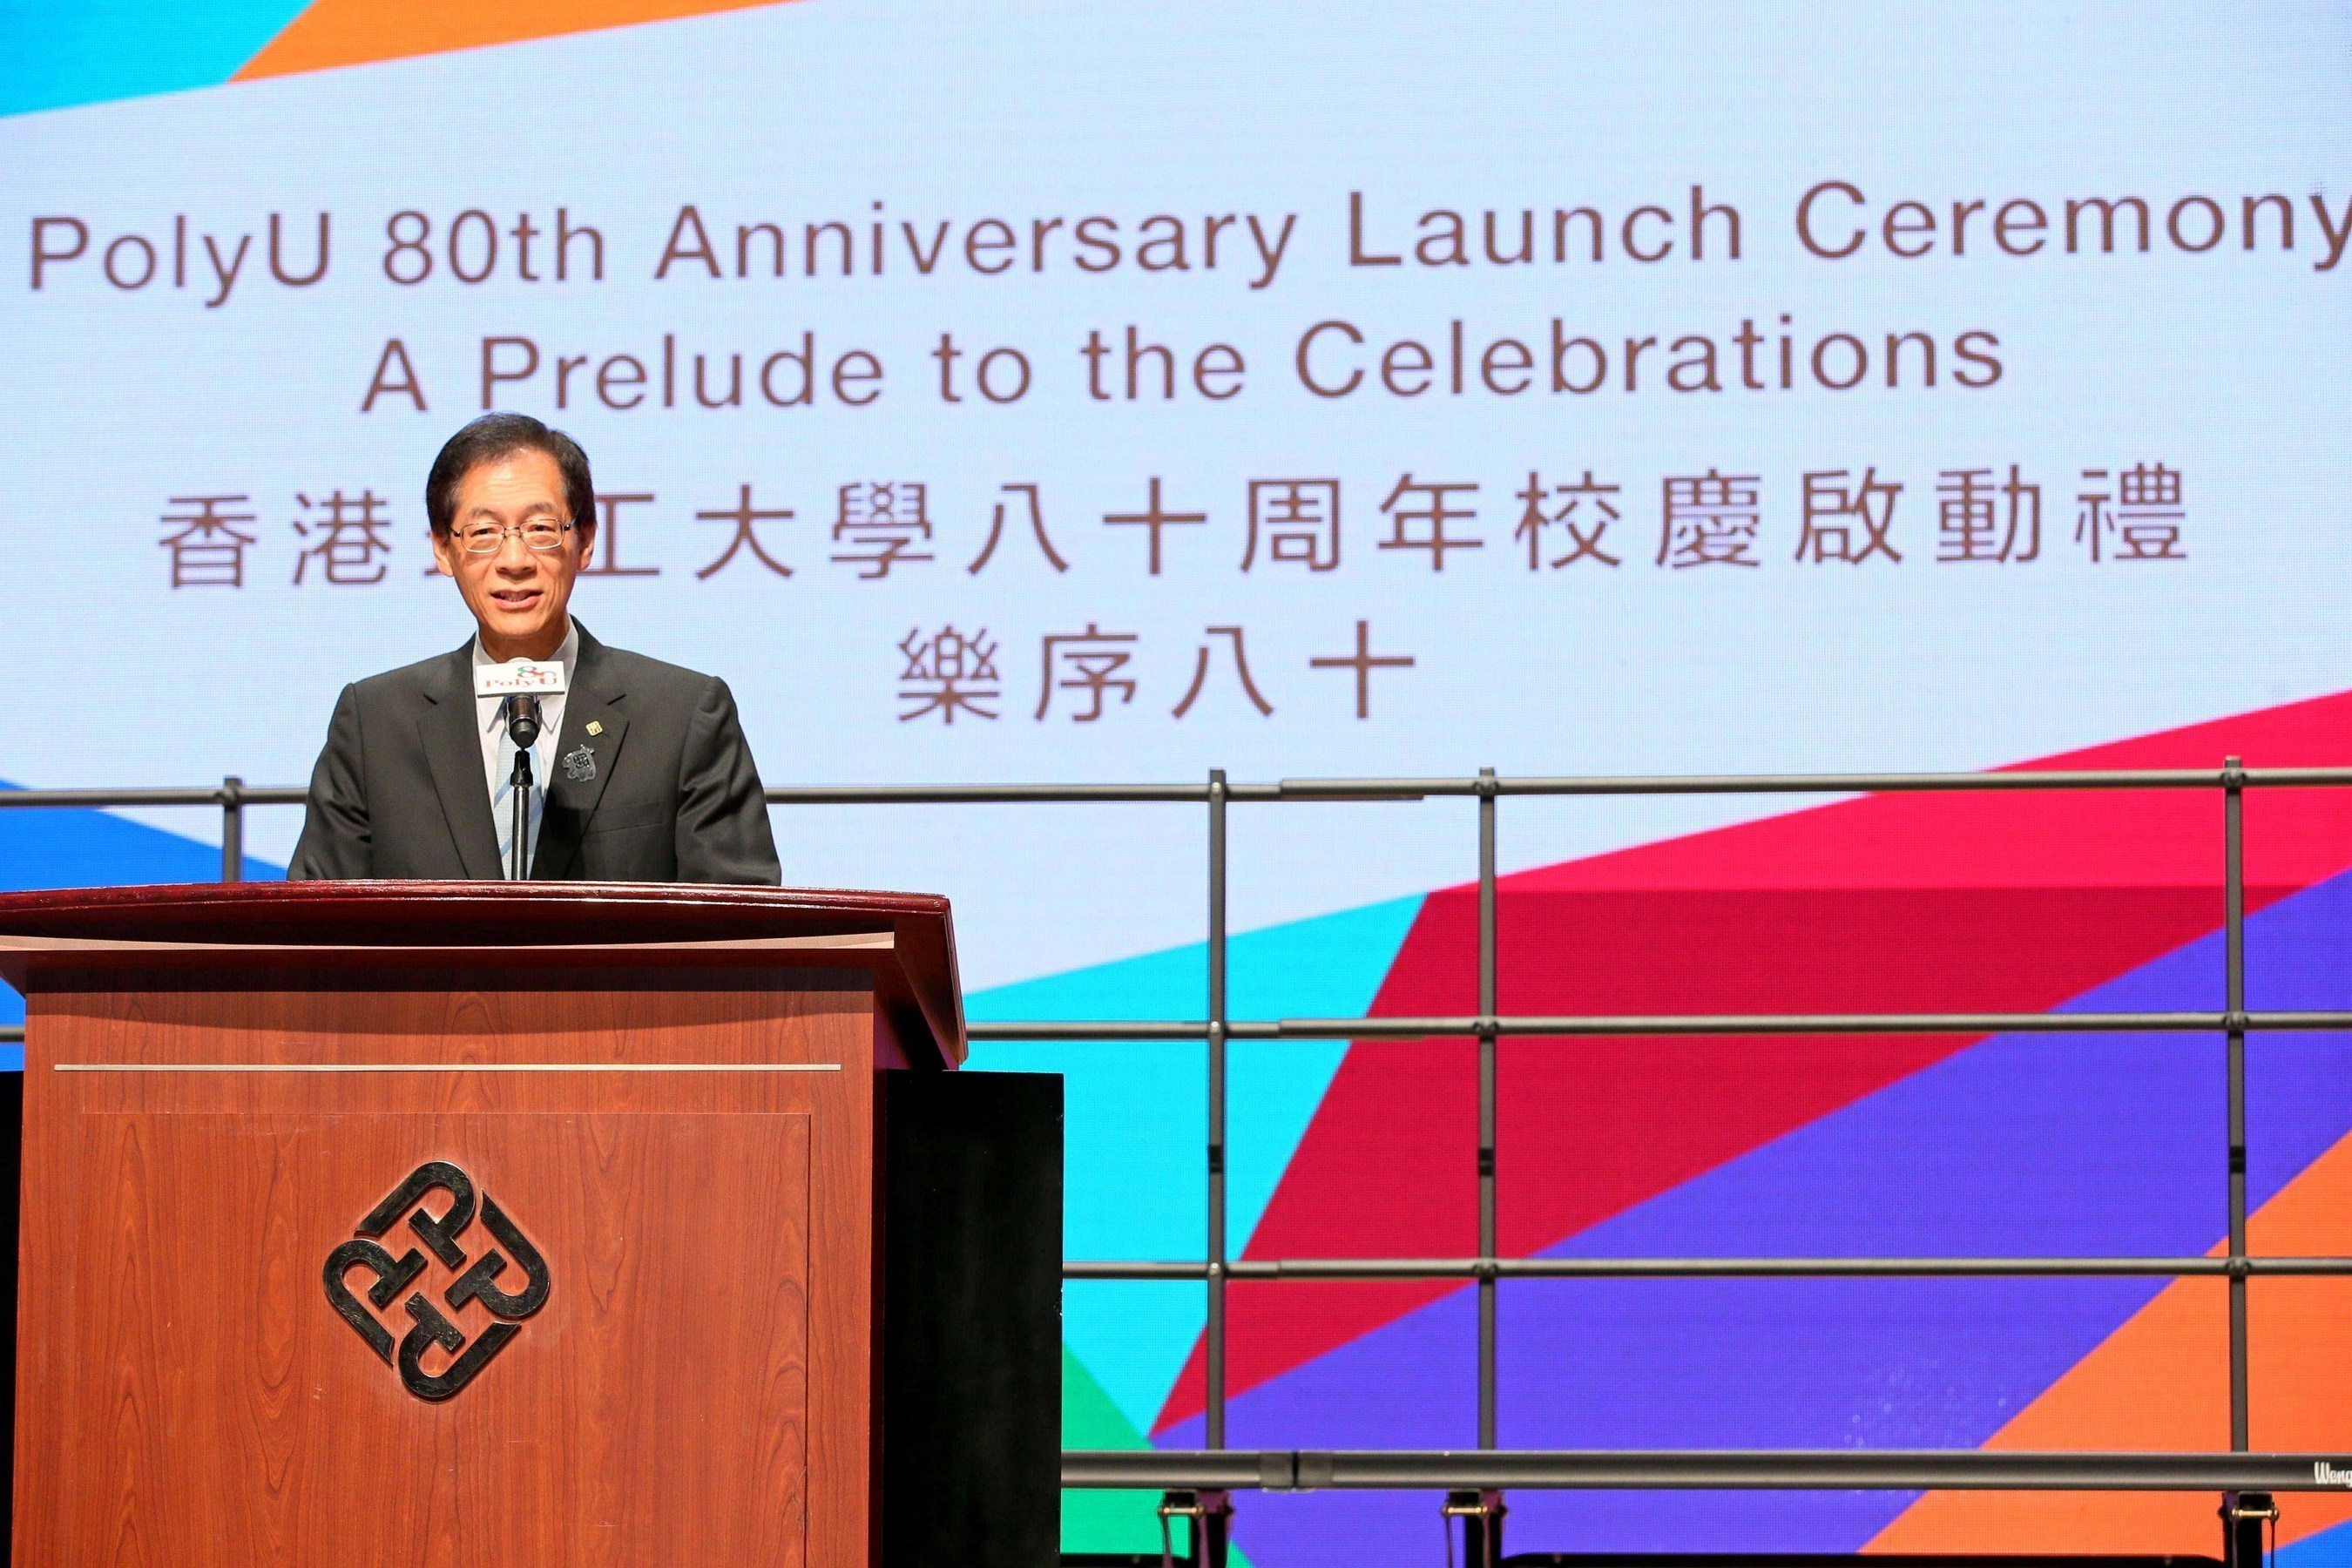 Professor Timothy W. Tong says in his speech at the Launch Ceremony that PolyU has grown together with Hong Kong over the past eight decades in a fast-changing global landscape and answered to the call of the times appropriately. (PRNewsFoto/The Hong Kong Polytechnic Univer)